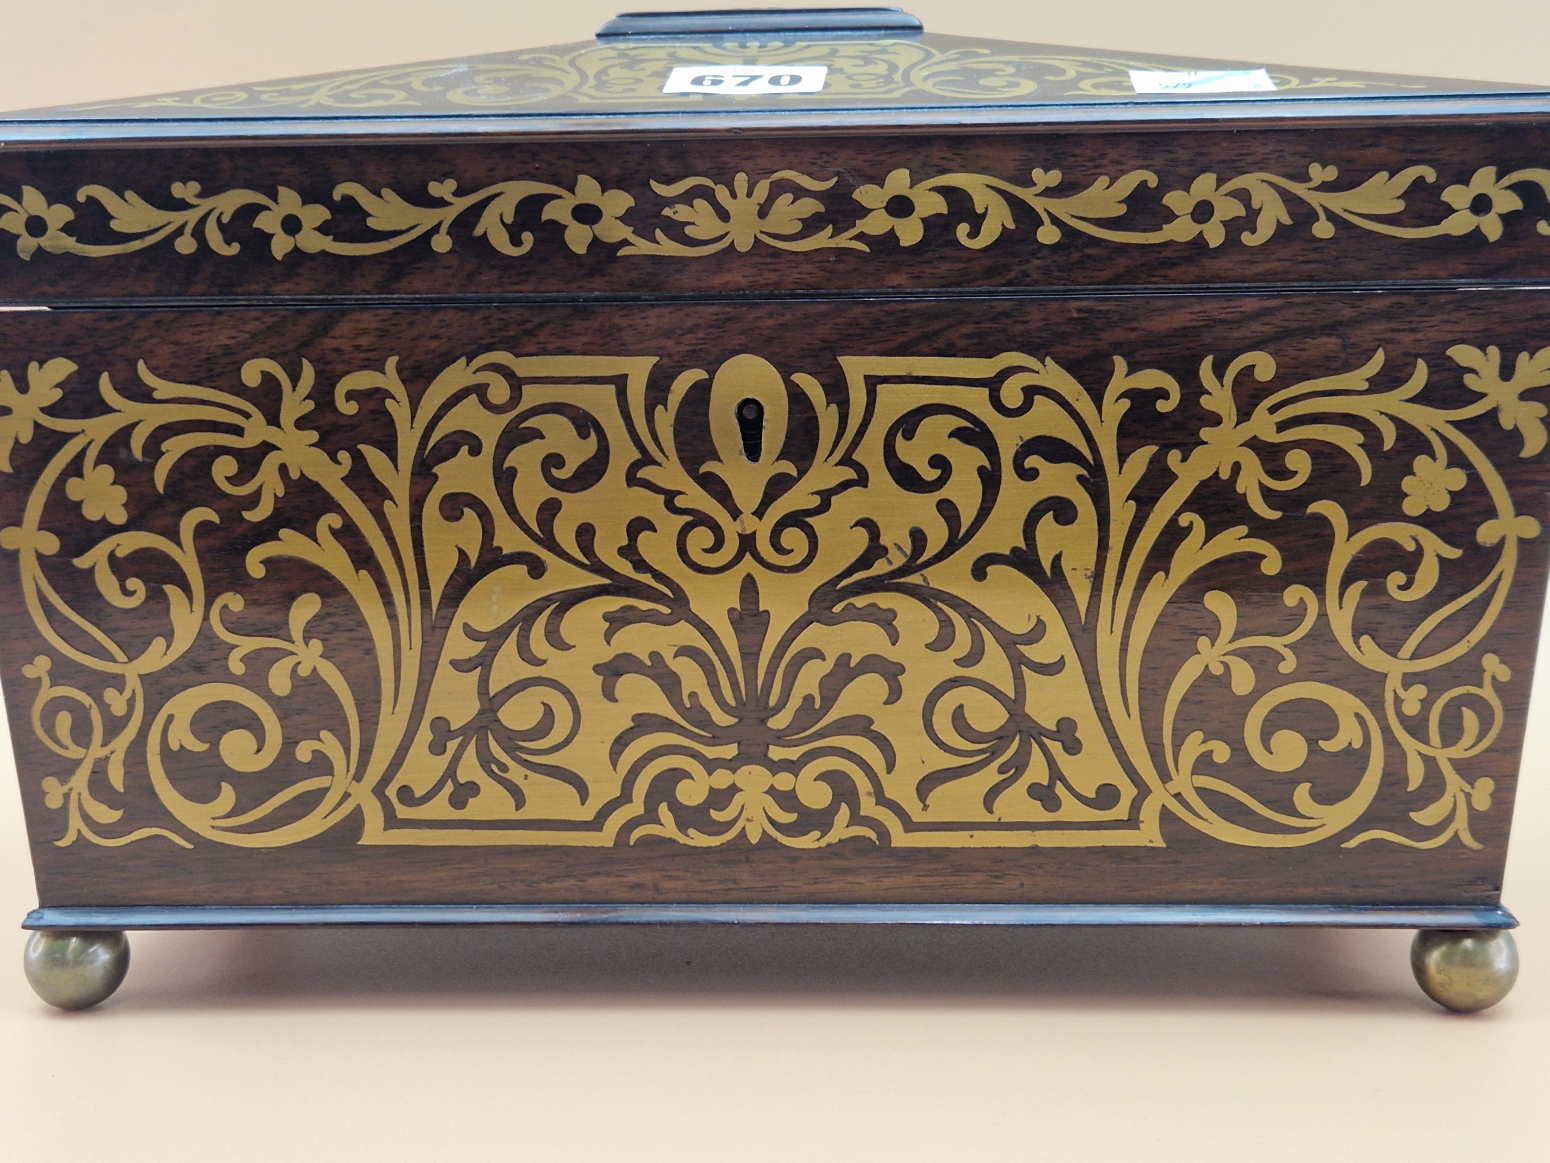 A BRASS INLAID ROSEWOOD SARCOPHAGUS SHAPED REGENCY TEA CADDY CONTAINING TWO CANISTERS AND A GLASS M - Image 3 of 8